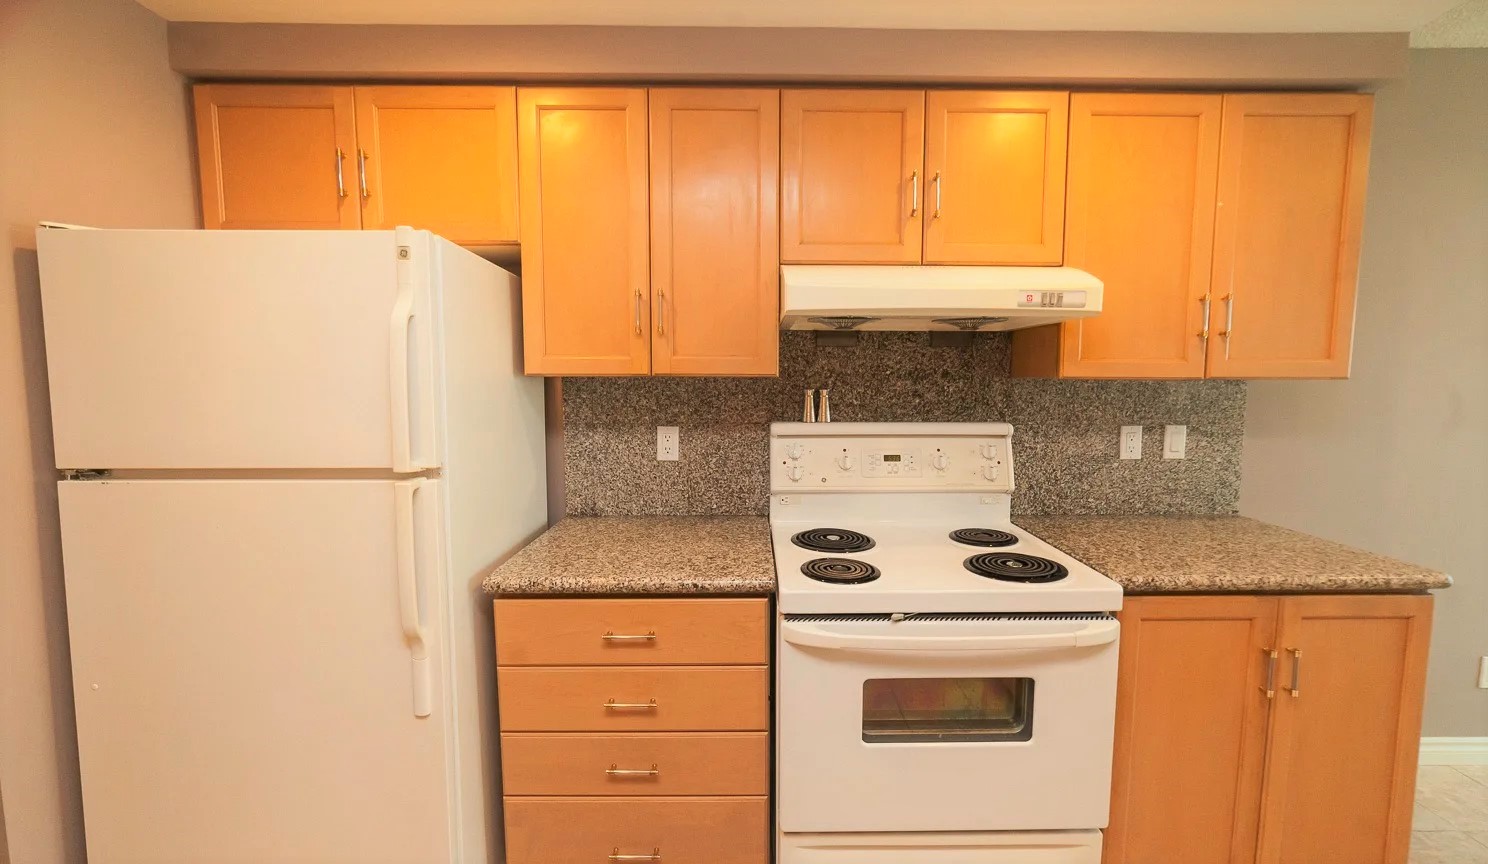 68 Simcoe kitchen with white fridge and stove, wooden cabinets and granite counters.